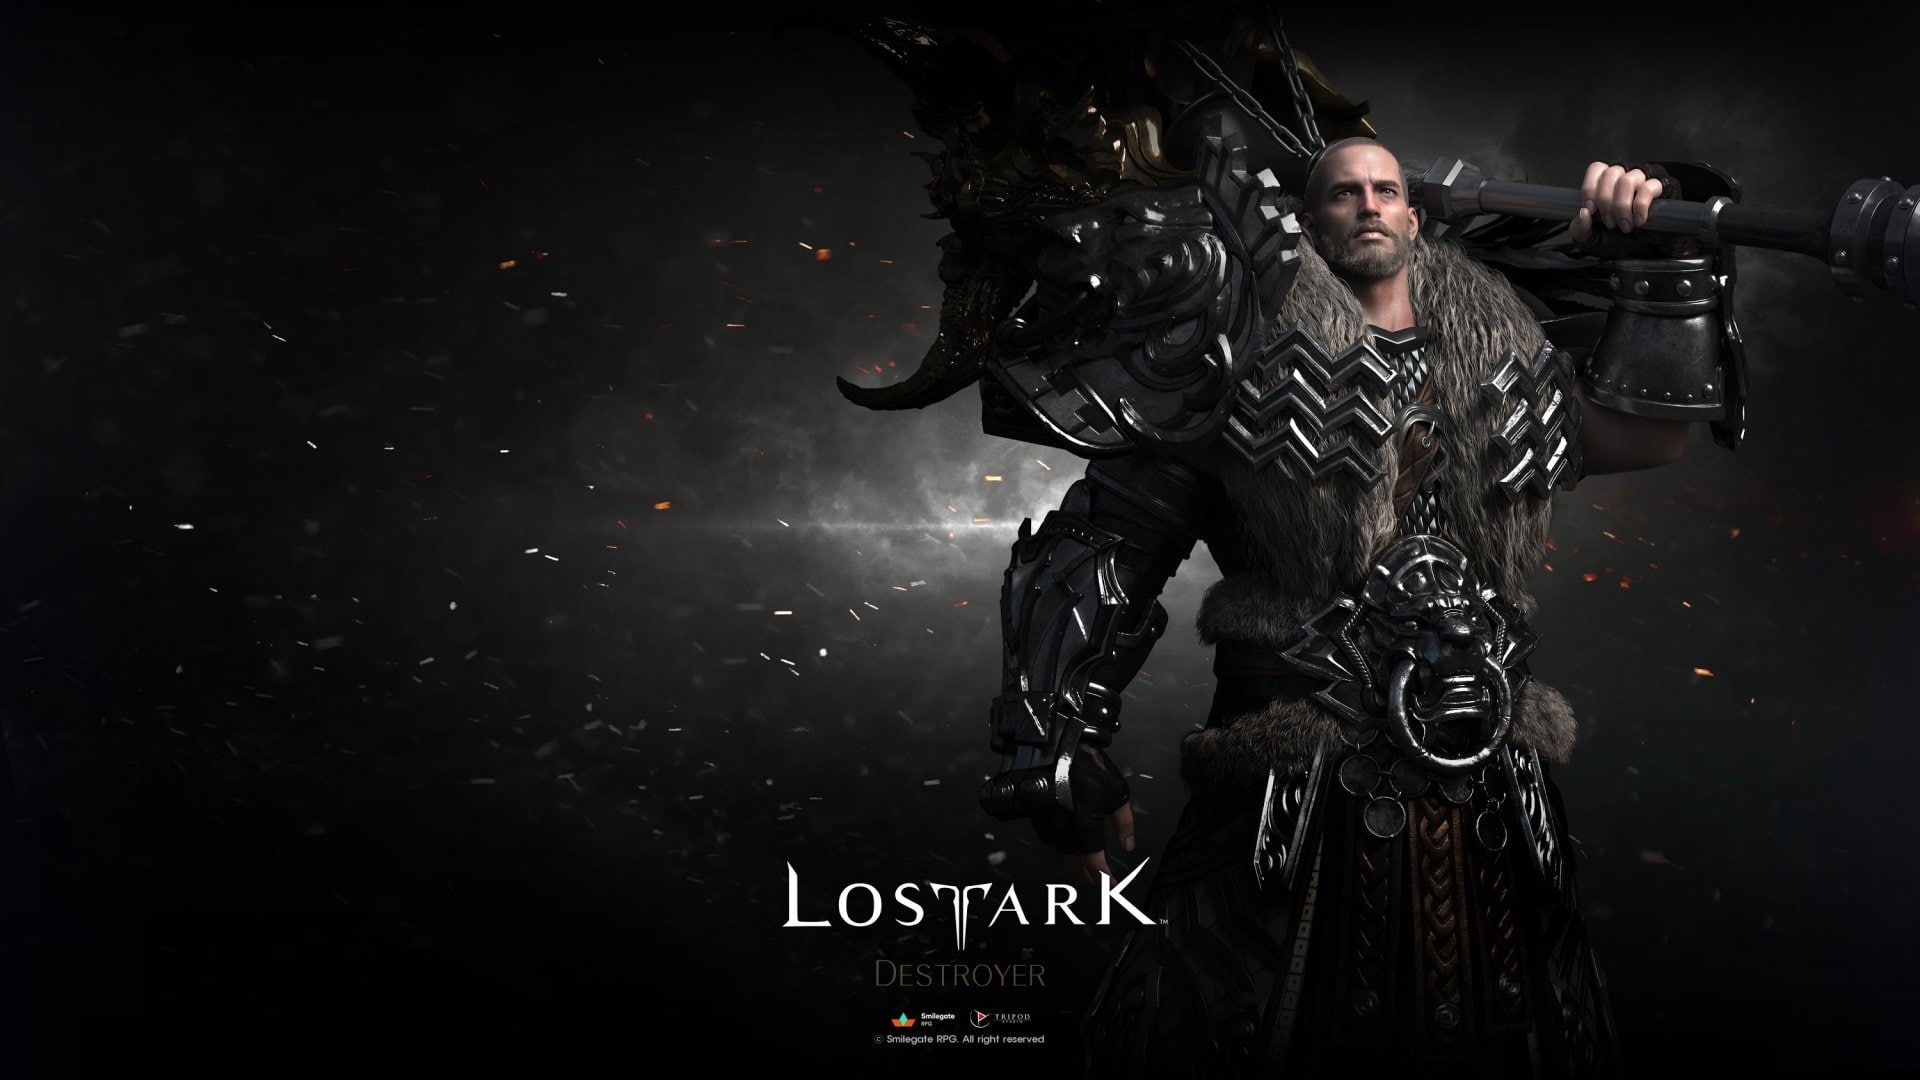 lost ark free download pc english version